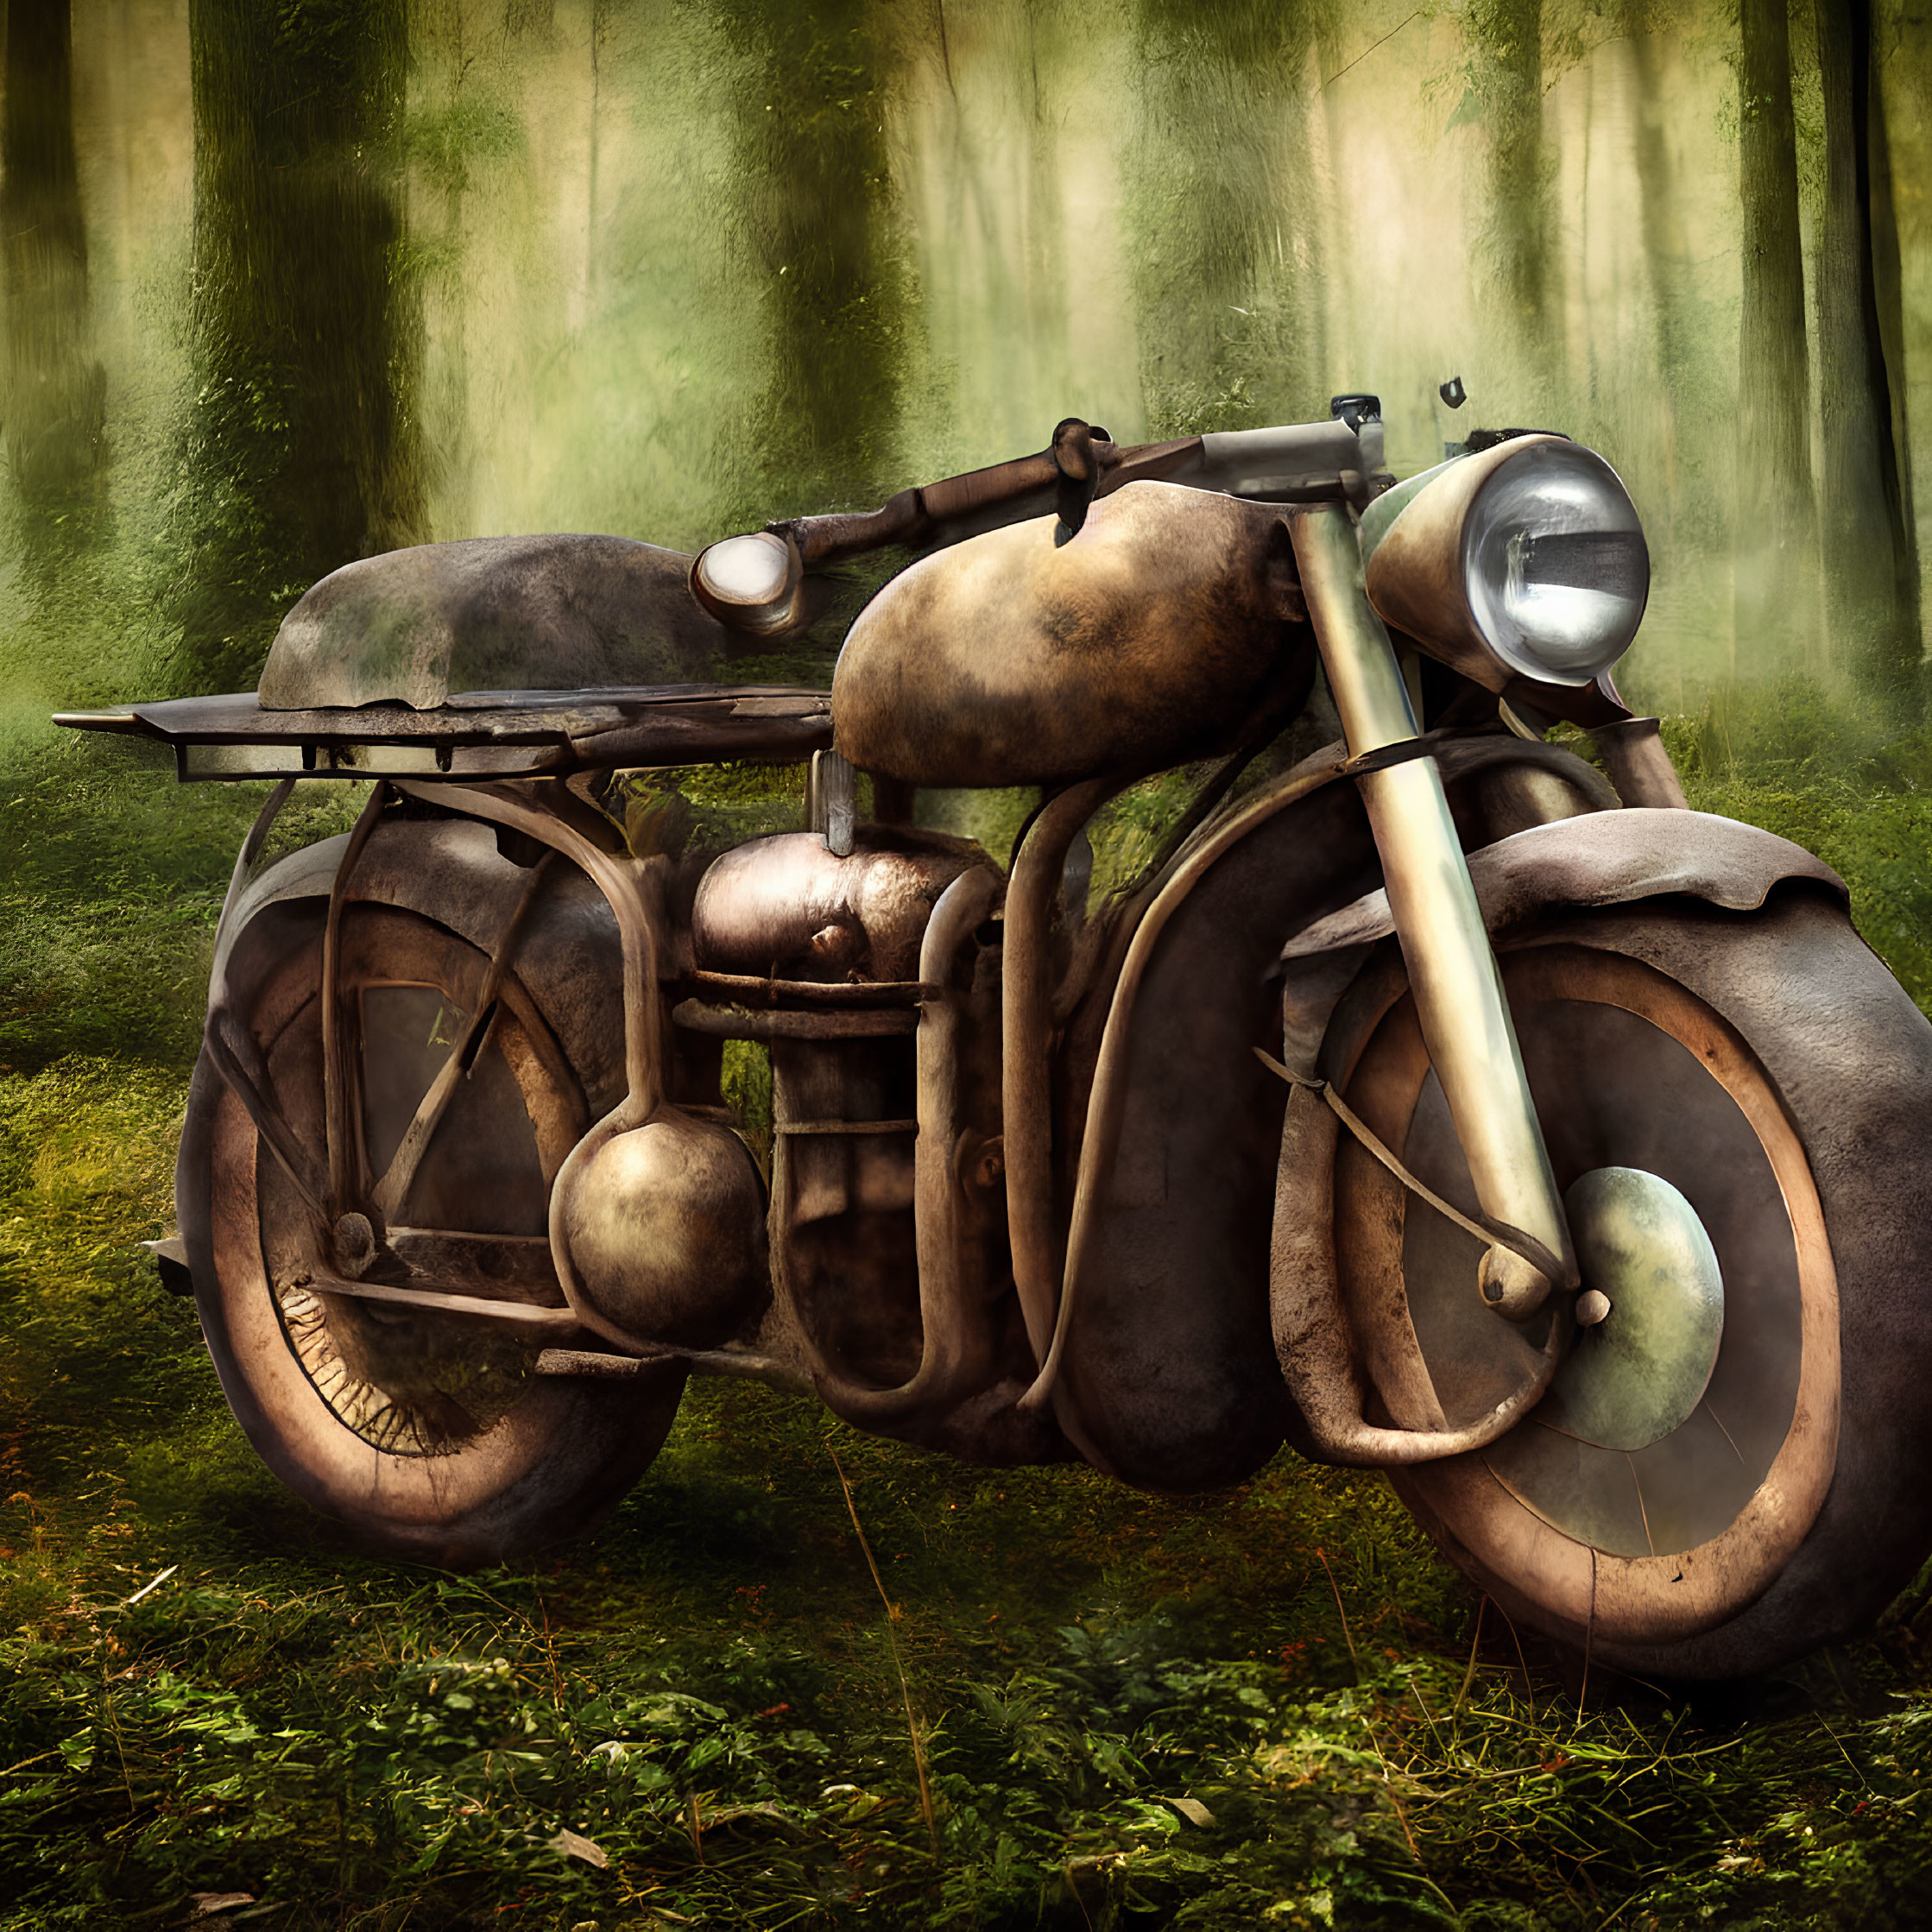 Rustic vintage motorcycle in misty forest setting